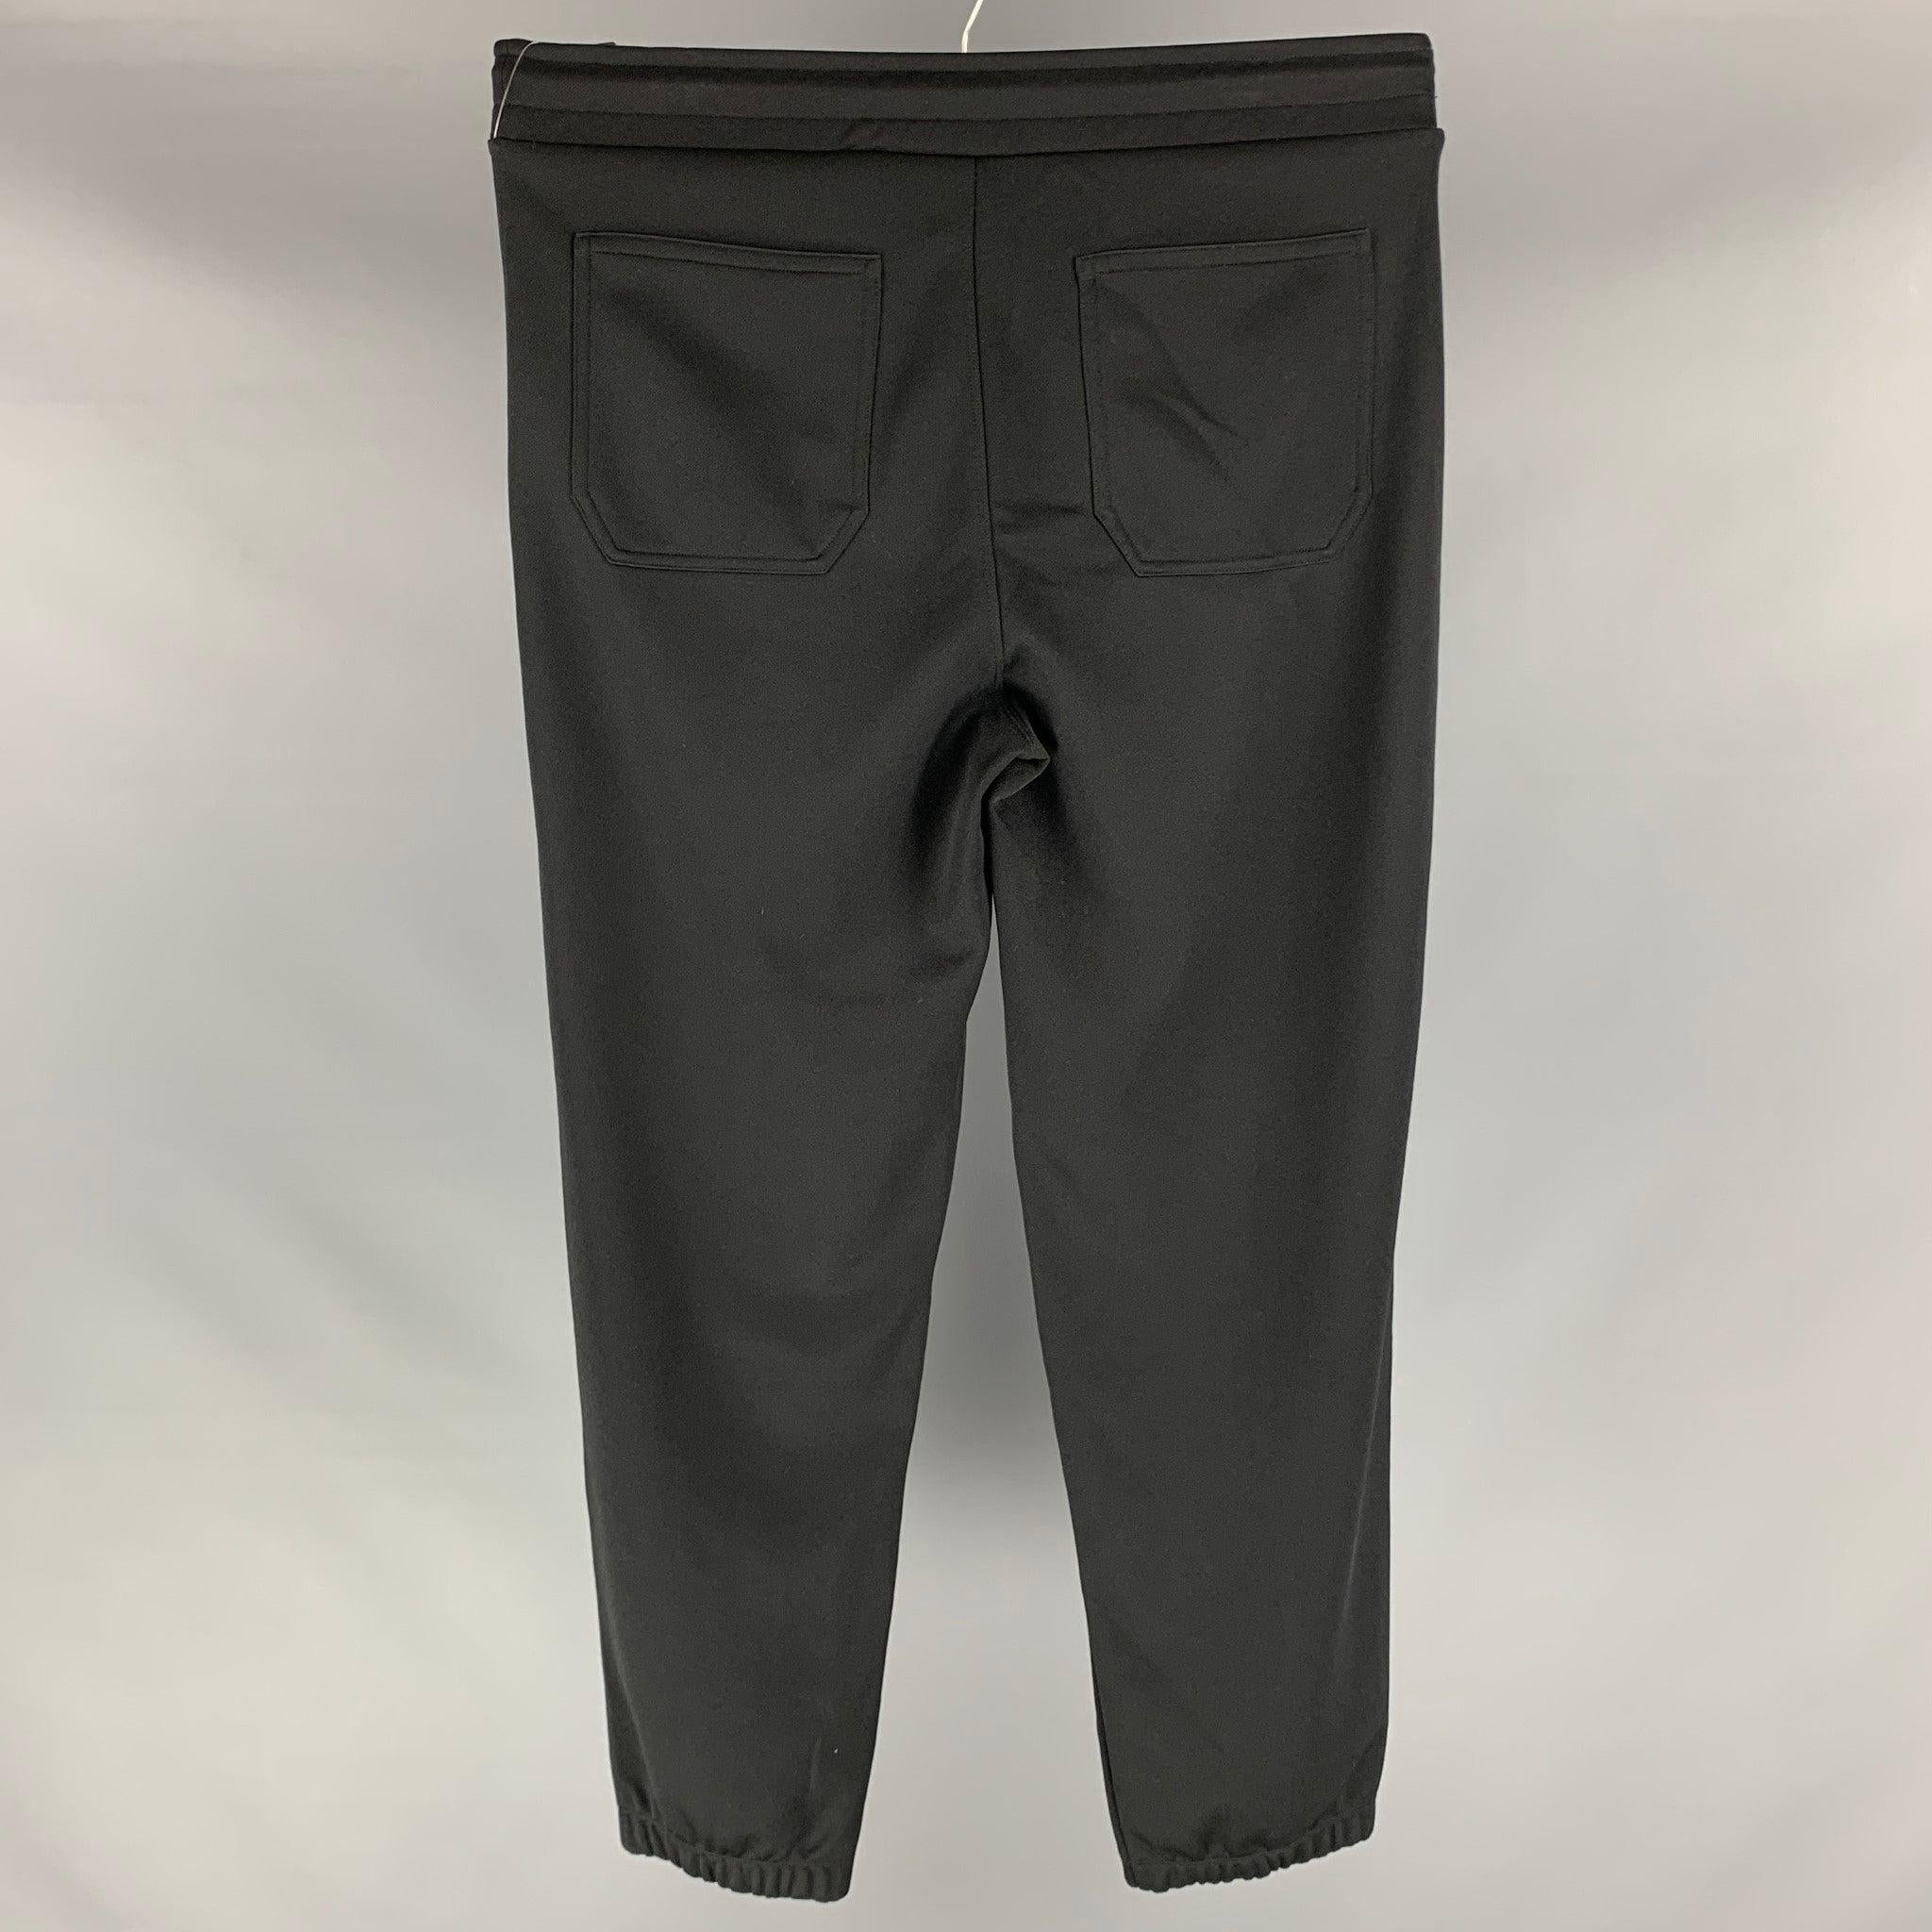 GIVENCHY sweatpants comes in a black cotton polyester jersey knit fabric featuring a logo trim detail, zip up pockets, elastic waist, and a drawstring. Excellent Pre-Owned Condition.  

Marked:   L 

Measurements: 
  Waist: 33 inches Rise: 13 inches